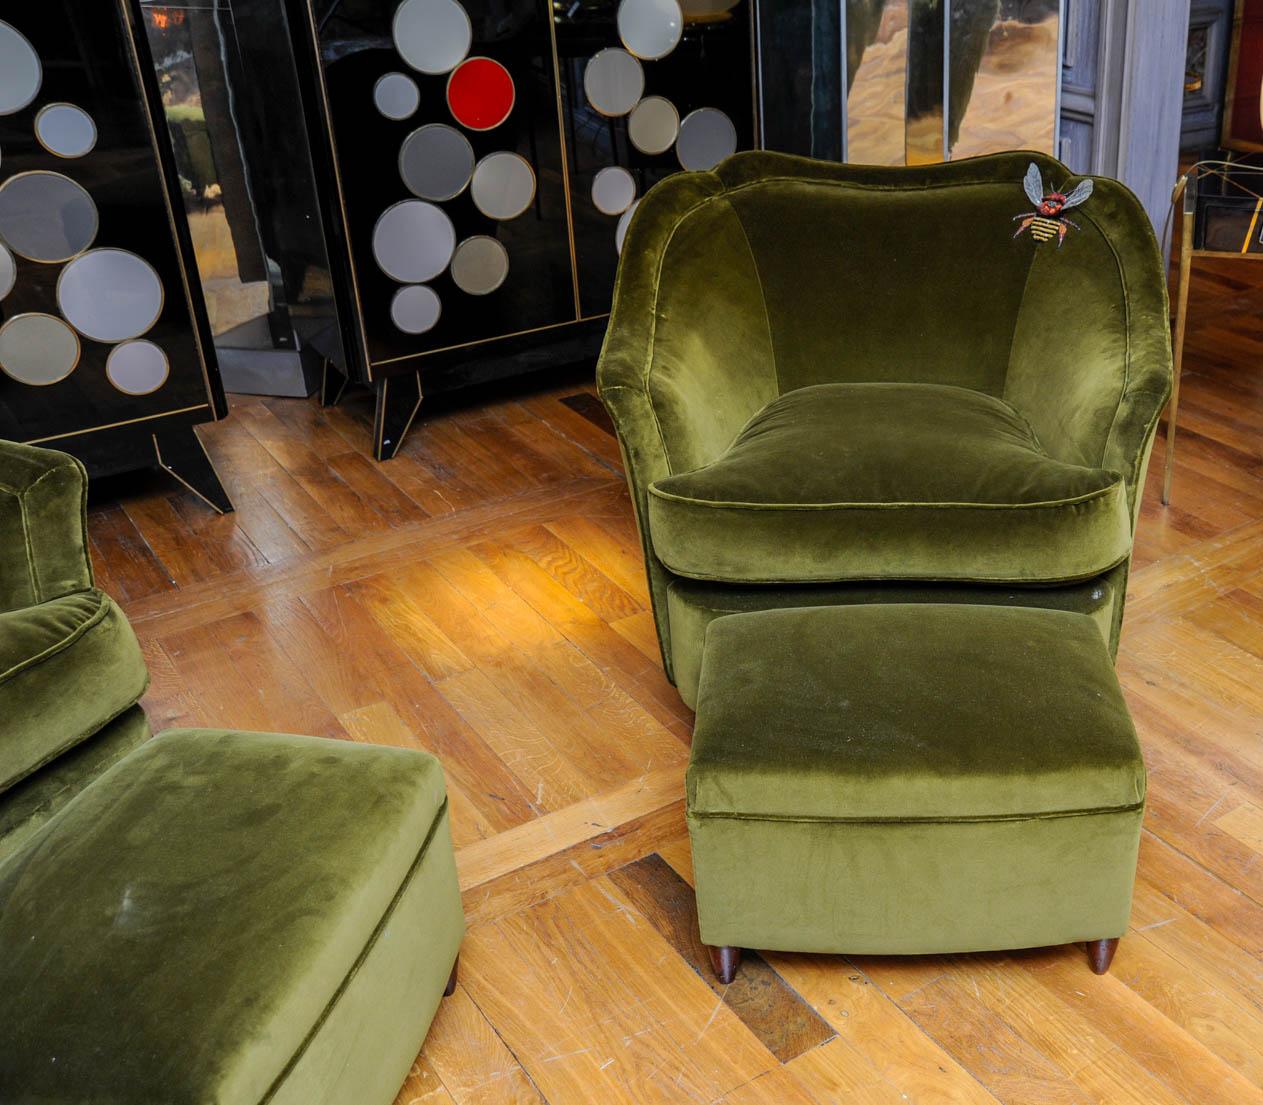 These vintage armchairs with their assorted footstools from the 1950s have been entirely reupholstered with embroidered Pierre Frey green velvet.
Foostools dimensions: 34 x 50 x H 35 cm.